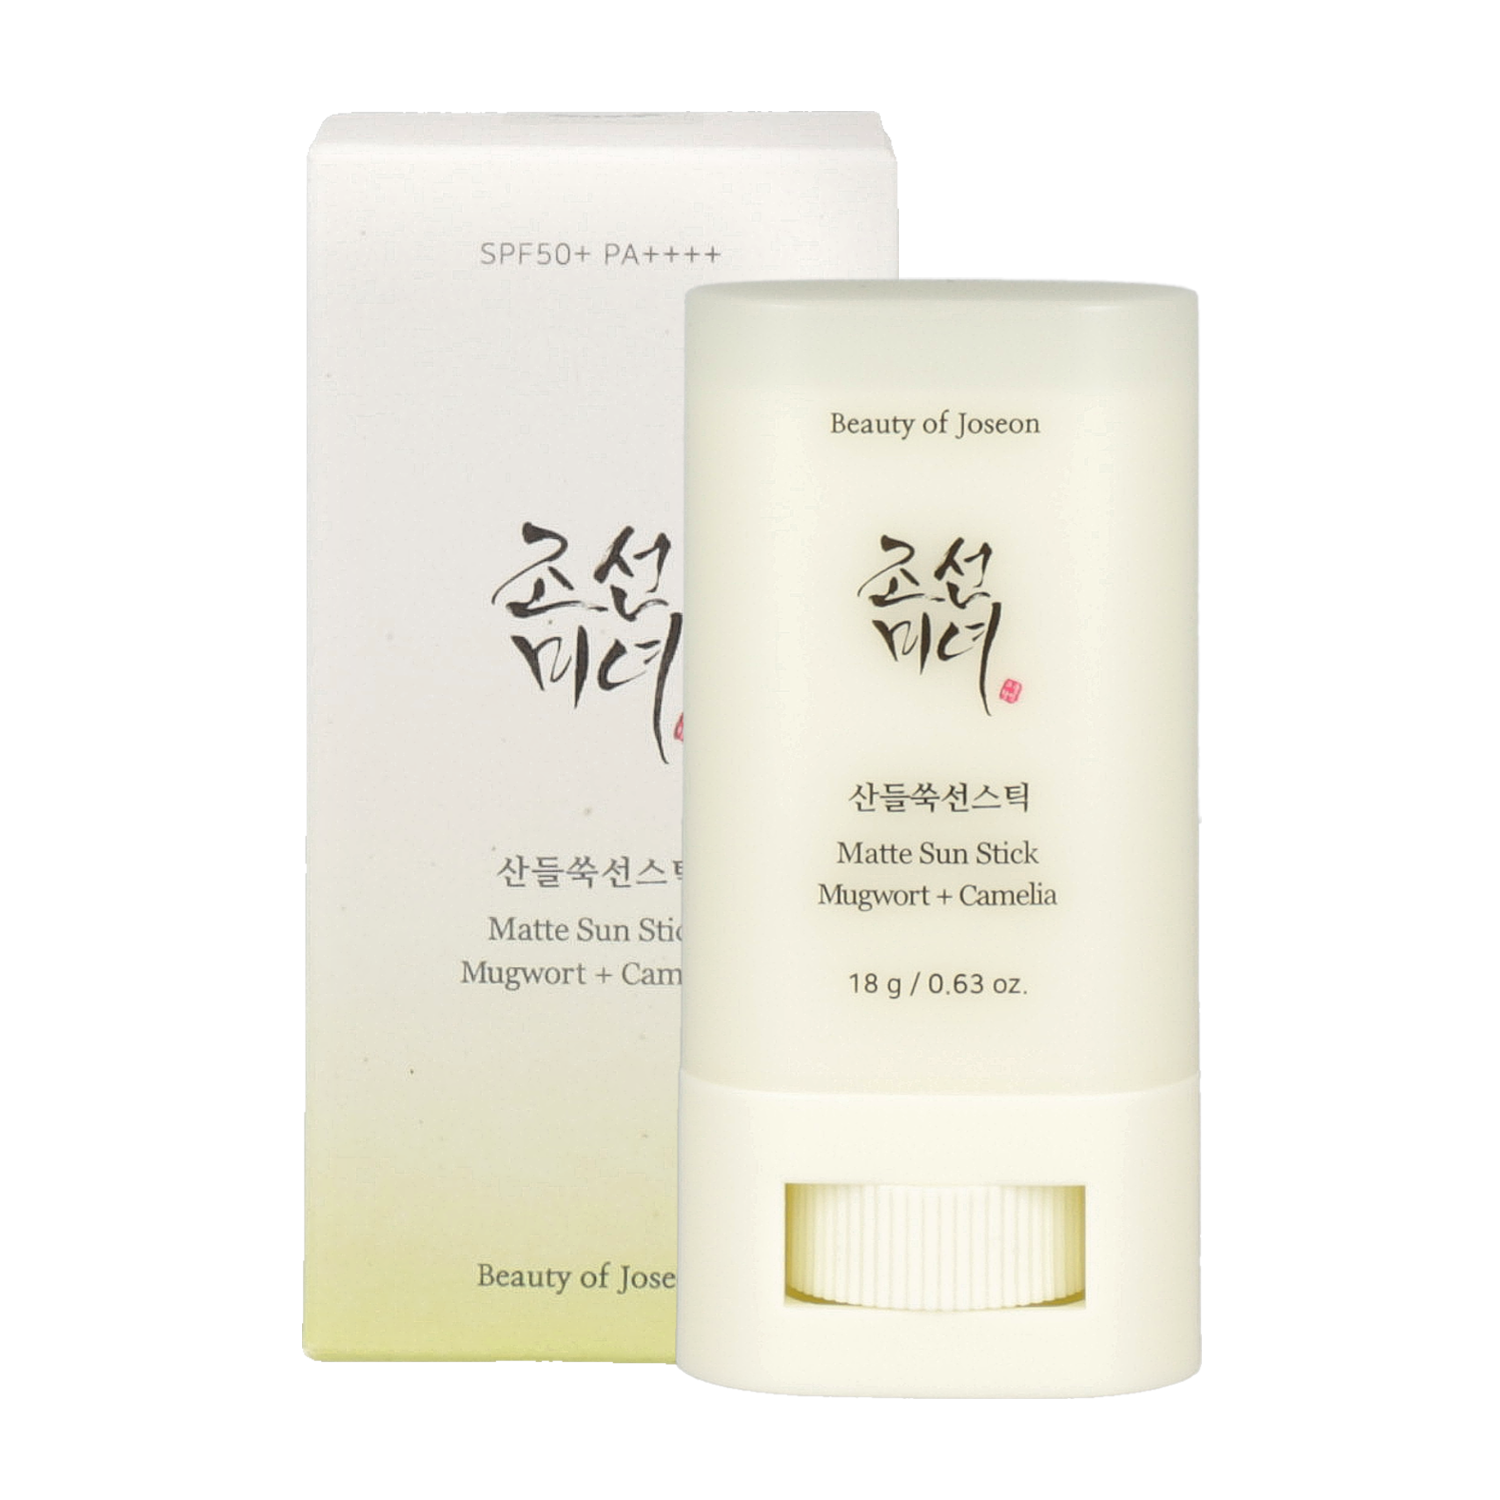 A 125-character alt text for the Beauty of Joseon Matte Sun Stick: "Beauty of Joseon Matte Sun Stick with Mugwort and Camelia, 18g."